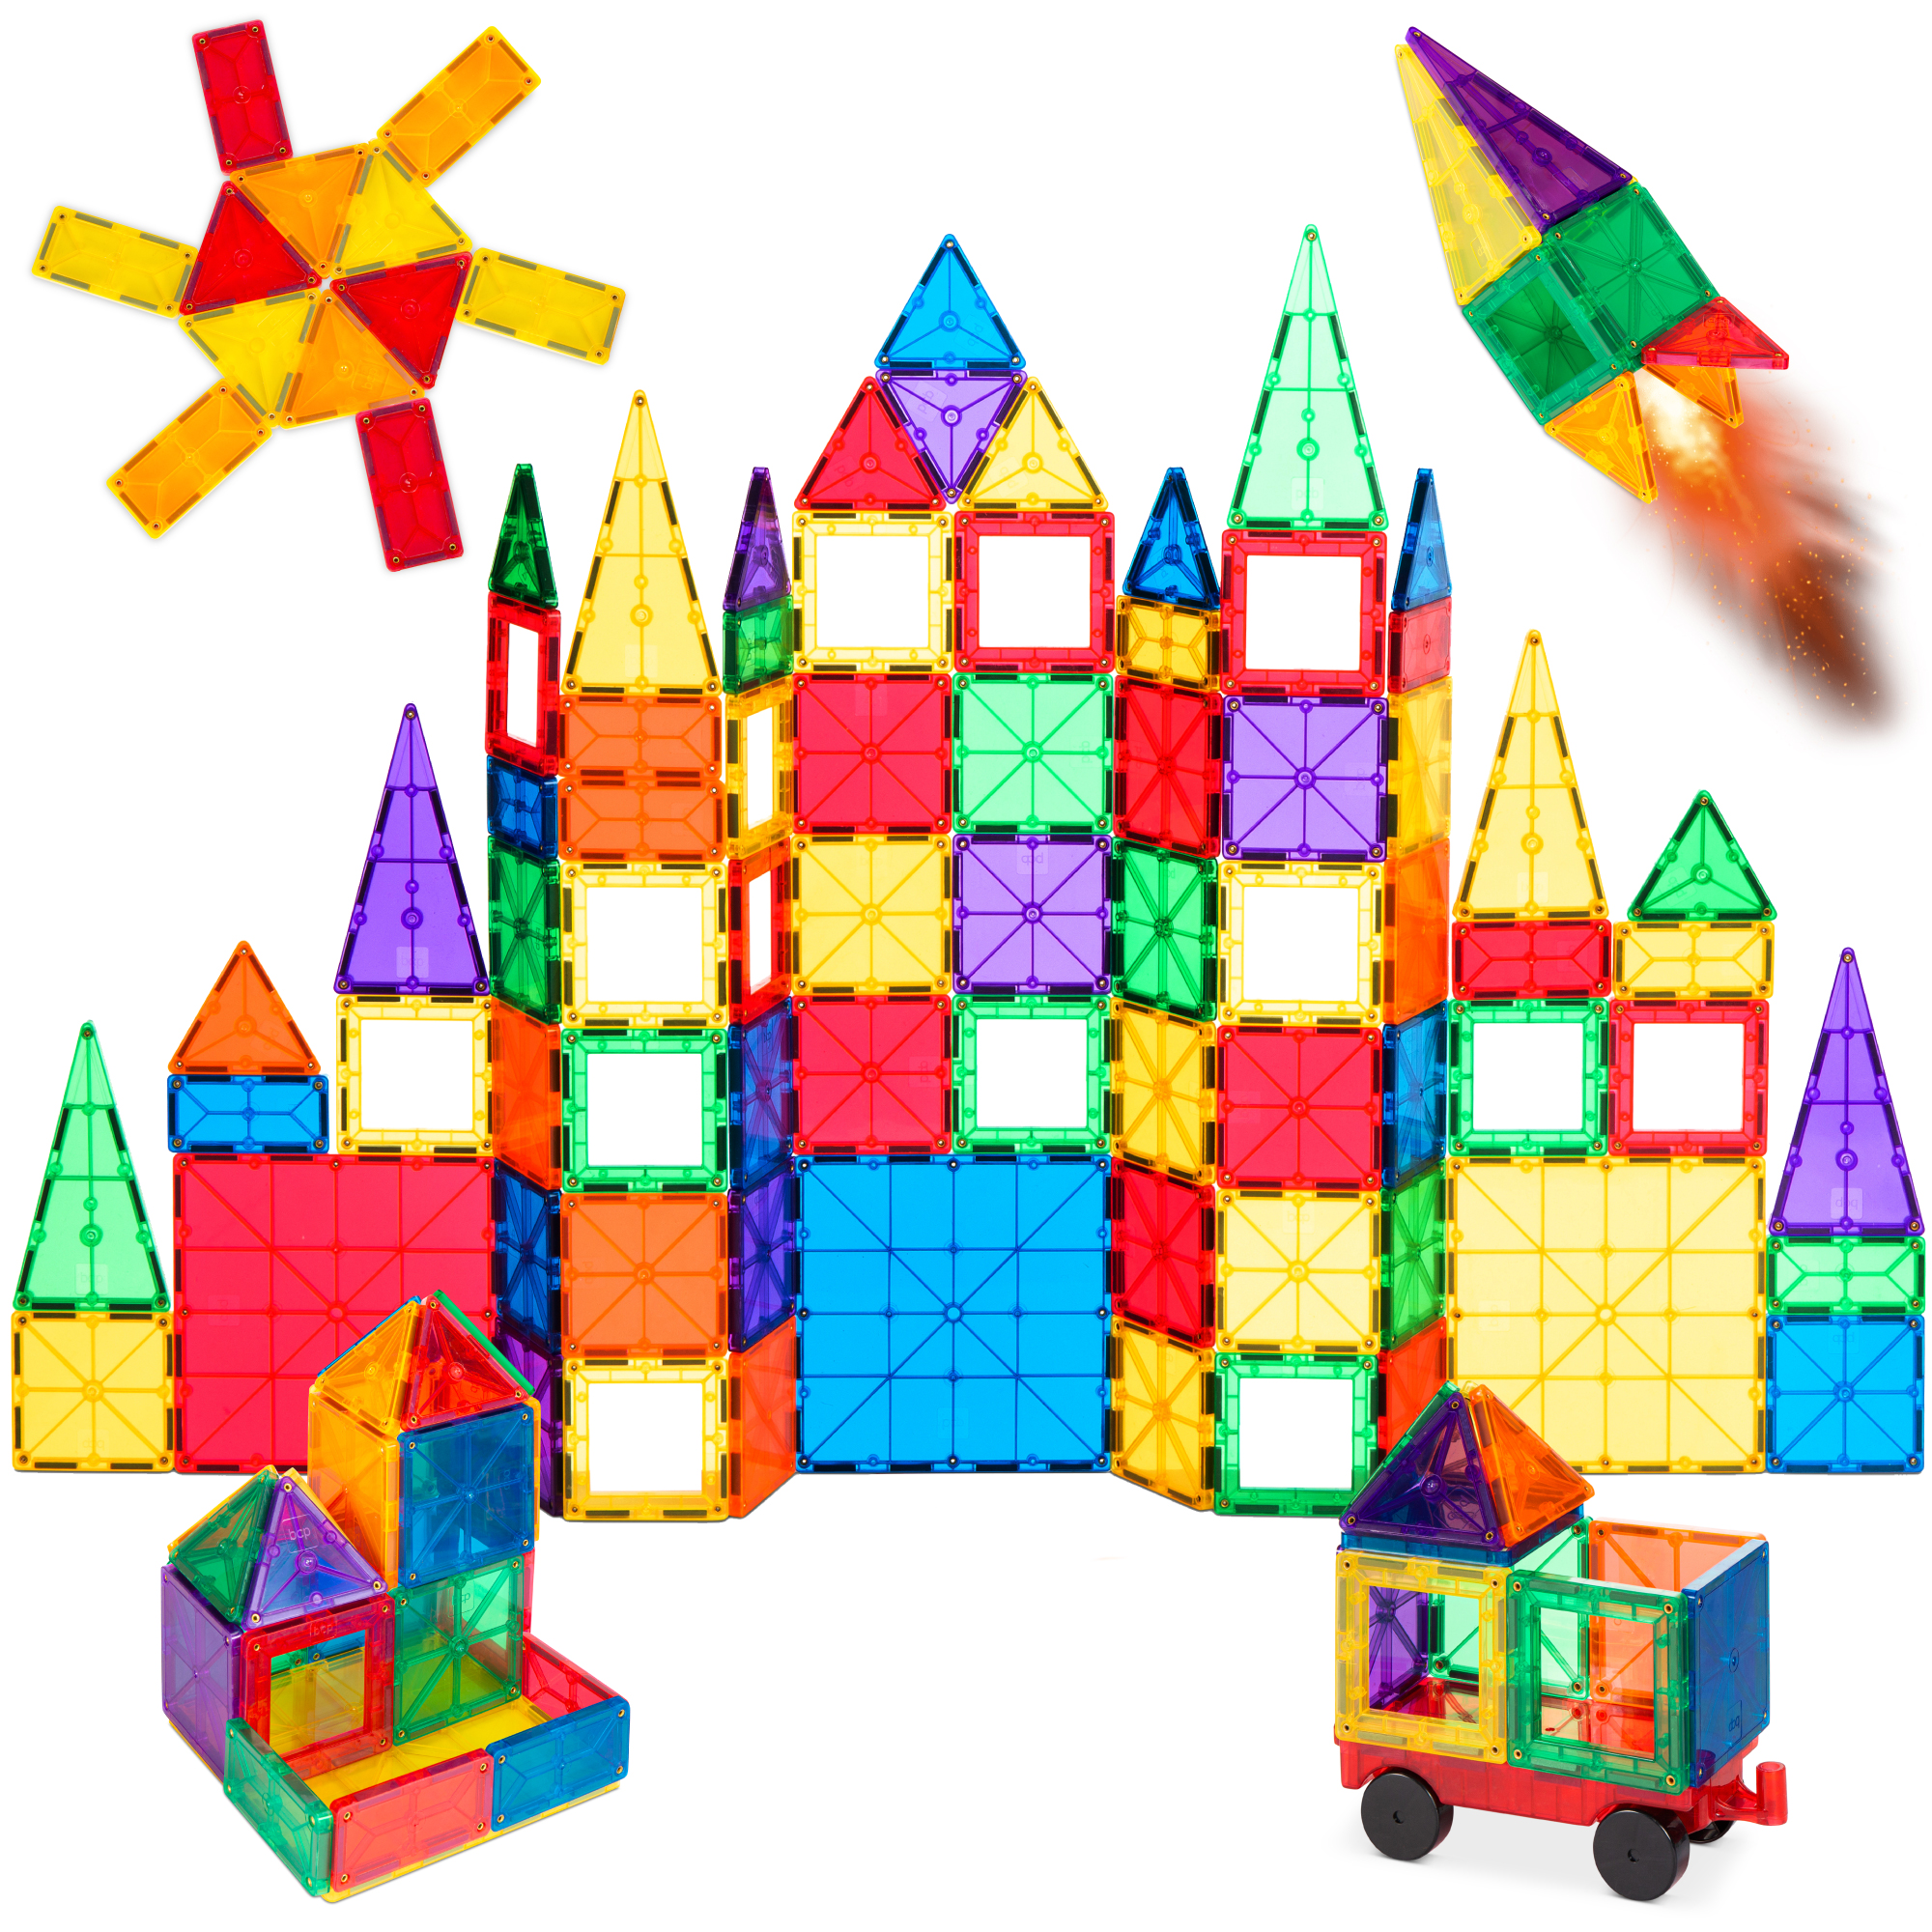 Best Choice Products 110-Piece Kids Magnetic Tiles Set, Educational Building STEM Toy w/ Case - Multicolor - image 1 of 7